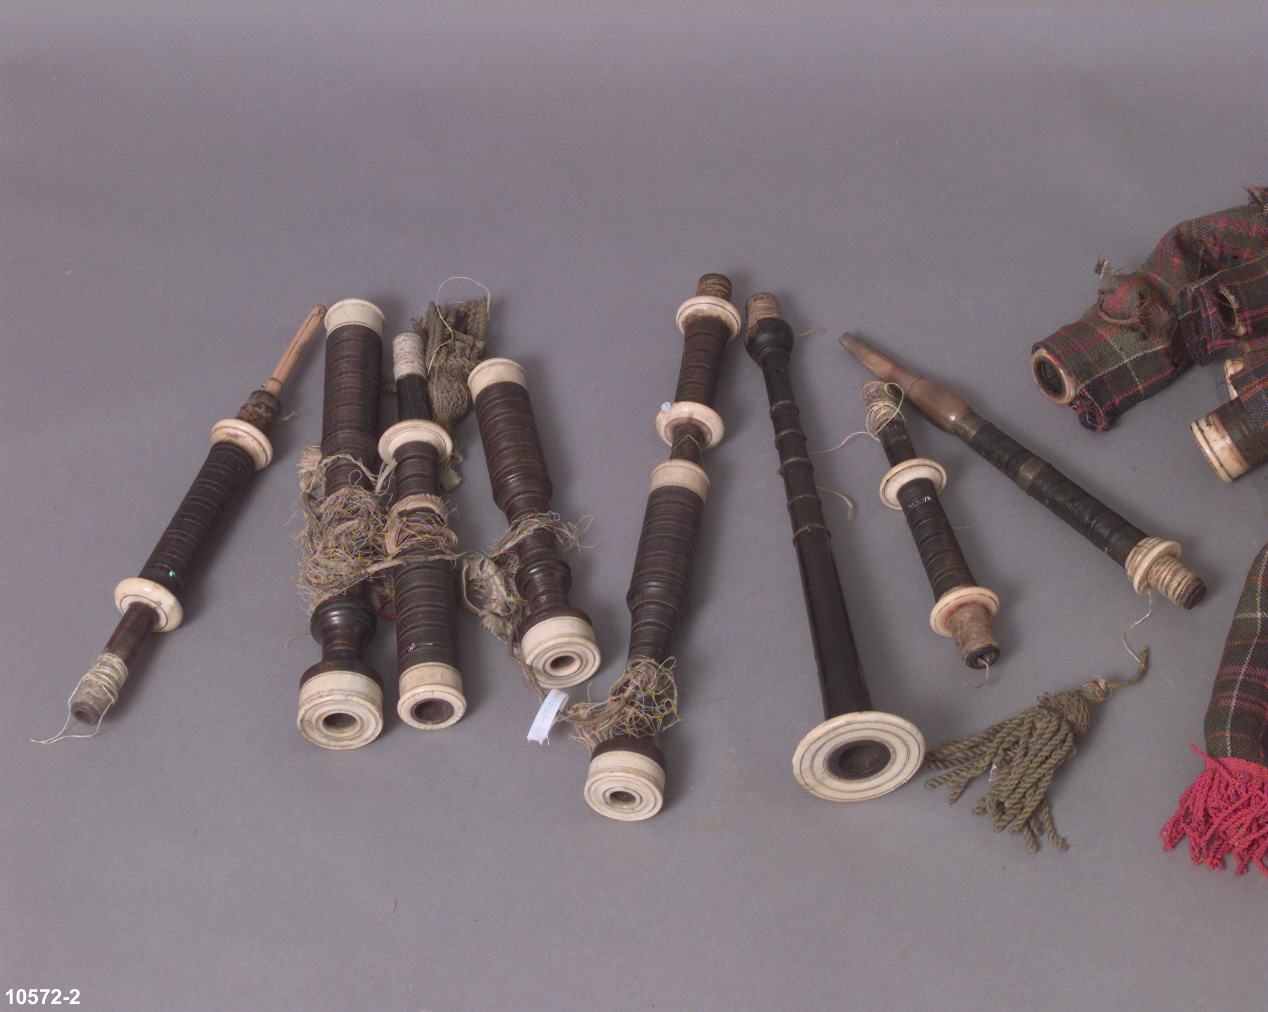 Bagpipes made by George Sherar